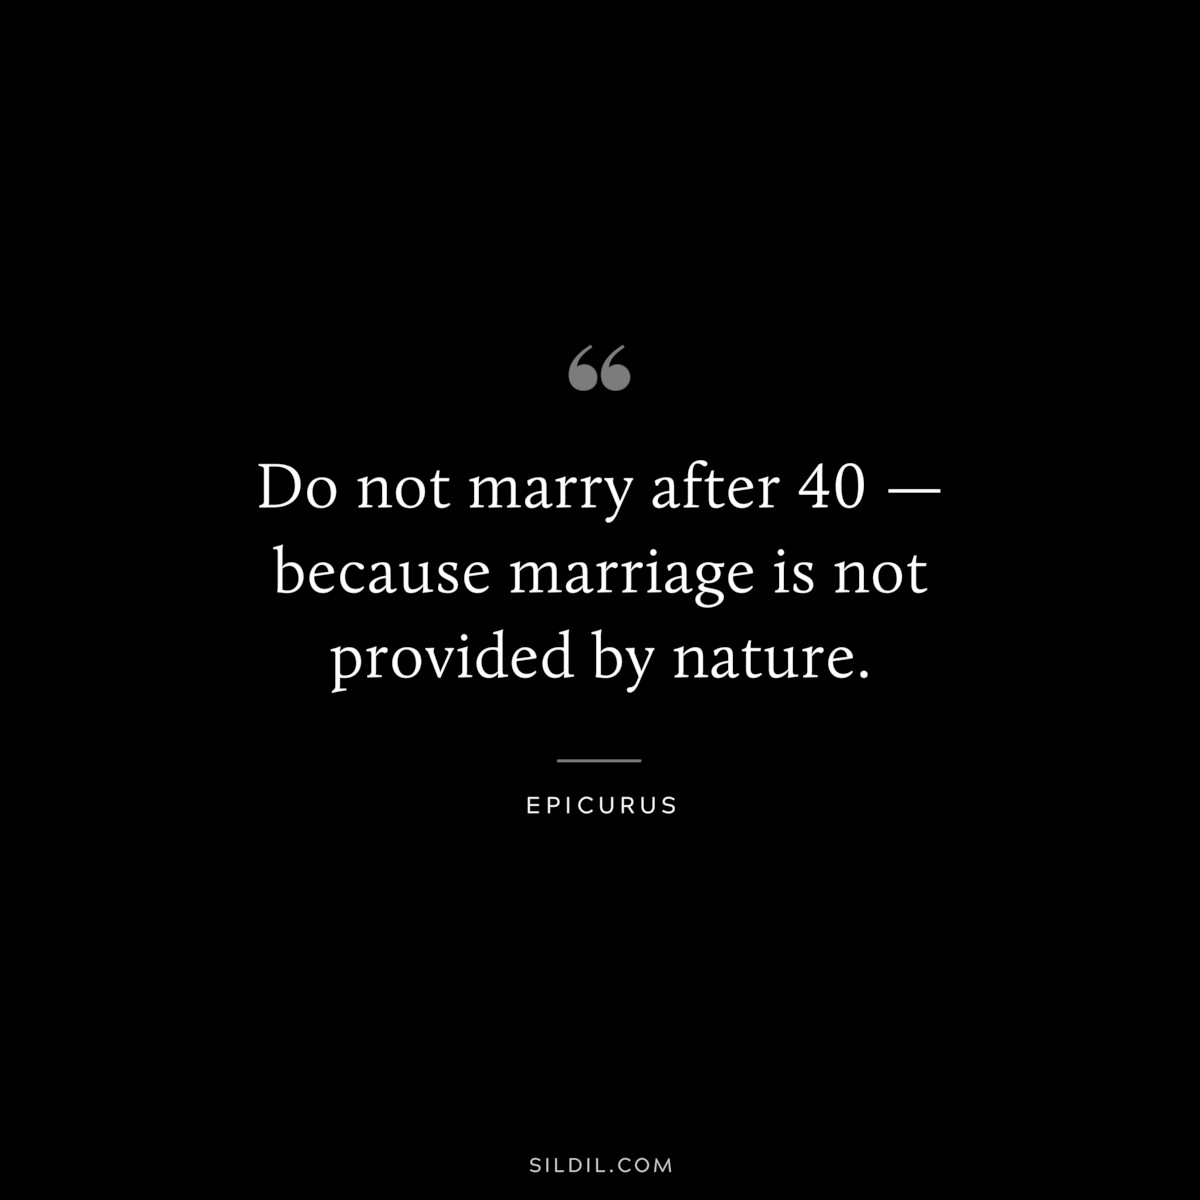 Do not marry after 40 — because marriage is not provided by nature. — Epicurus